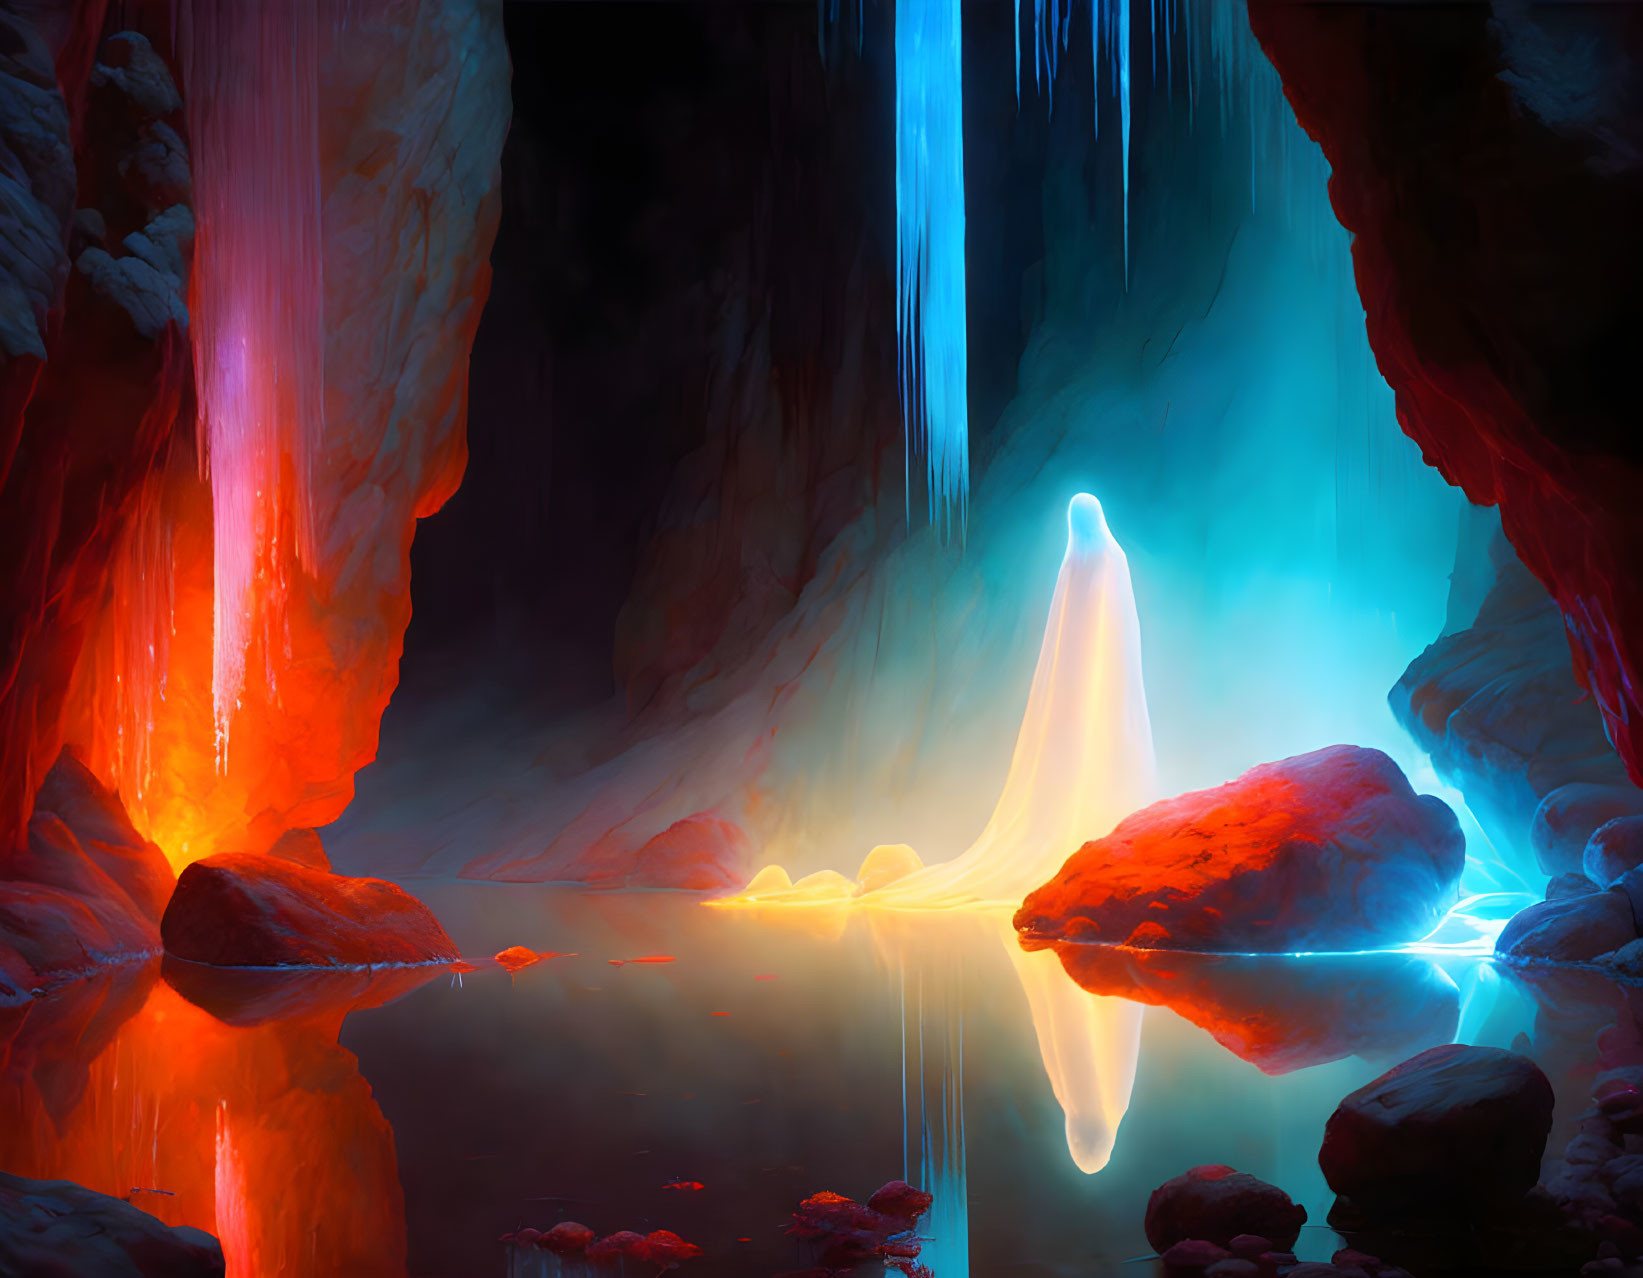 Ethereal figure in mystical cave with vibrant lighting and rocky terrain